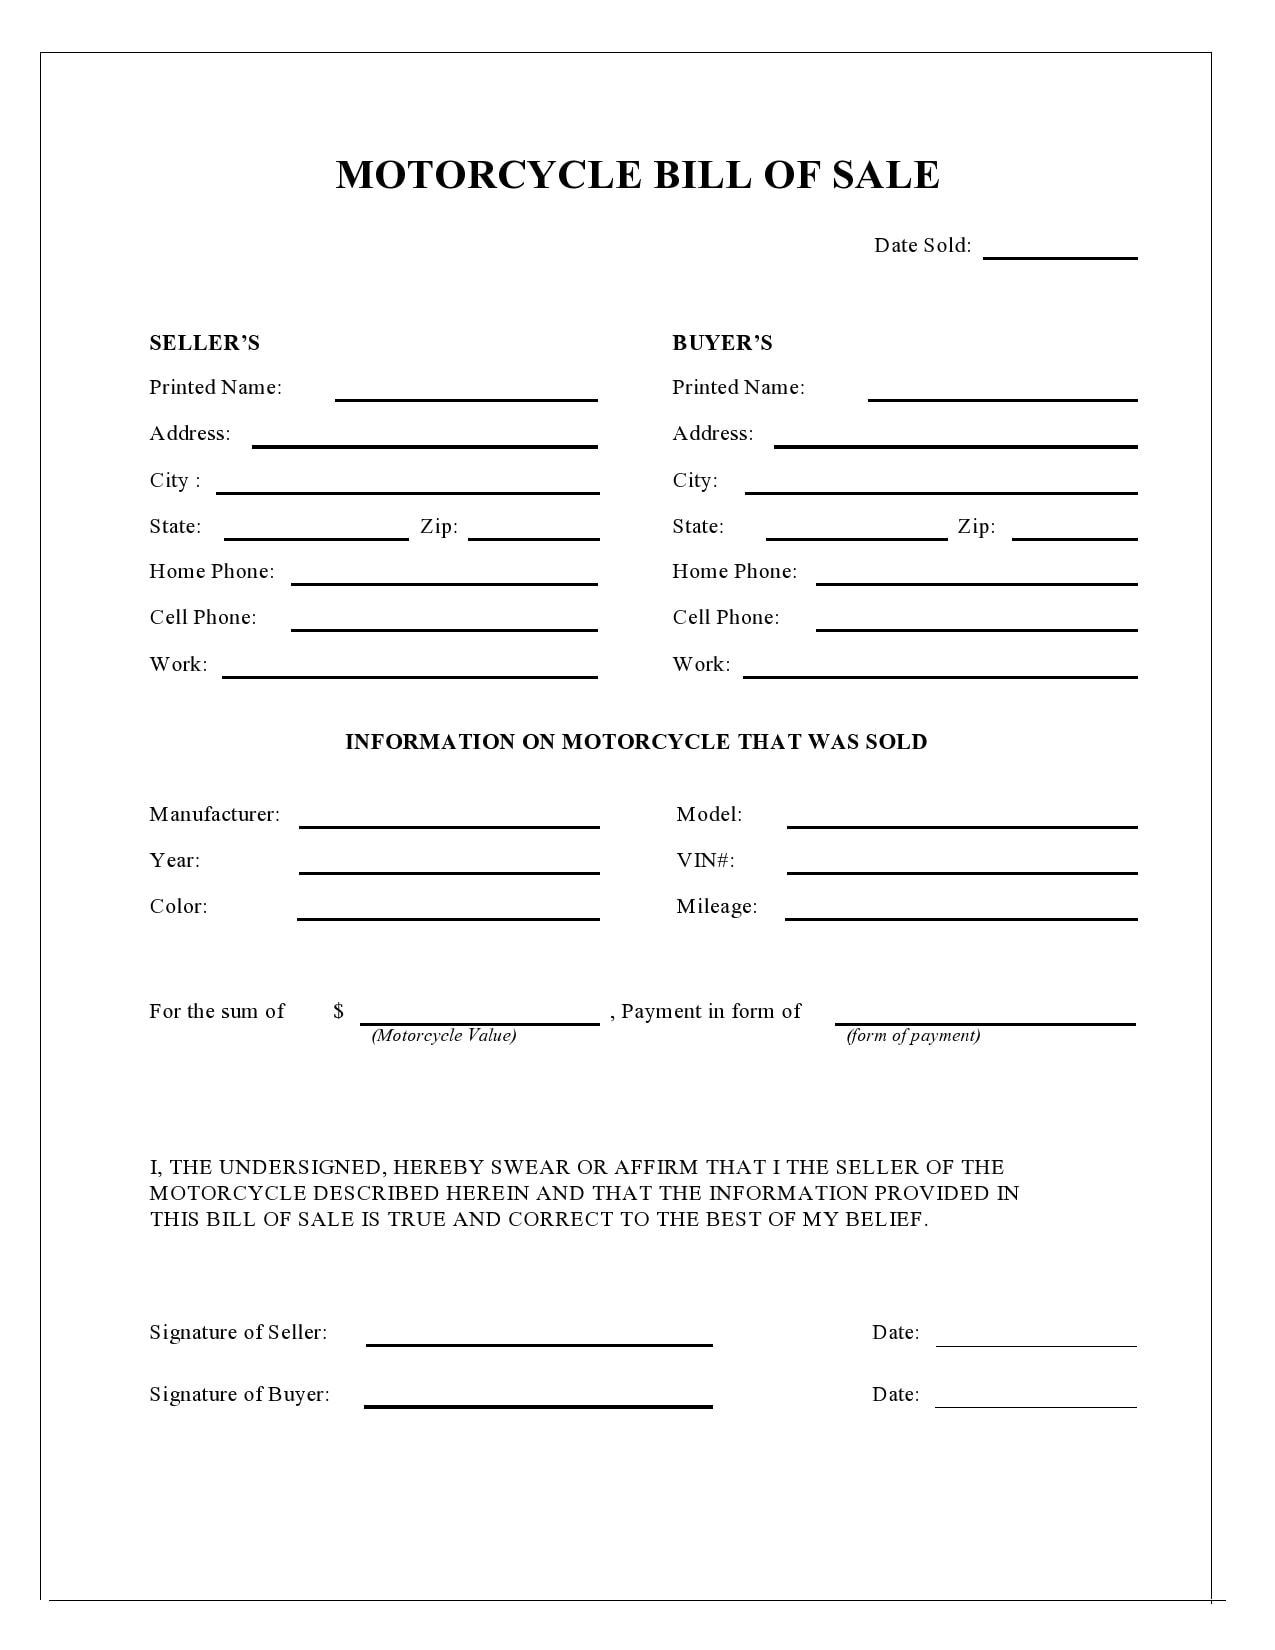 29 Printable Motorcycle Bill Of Sale Forms Free Templatearchive Simple motorcycle bill of sale